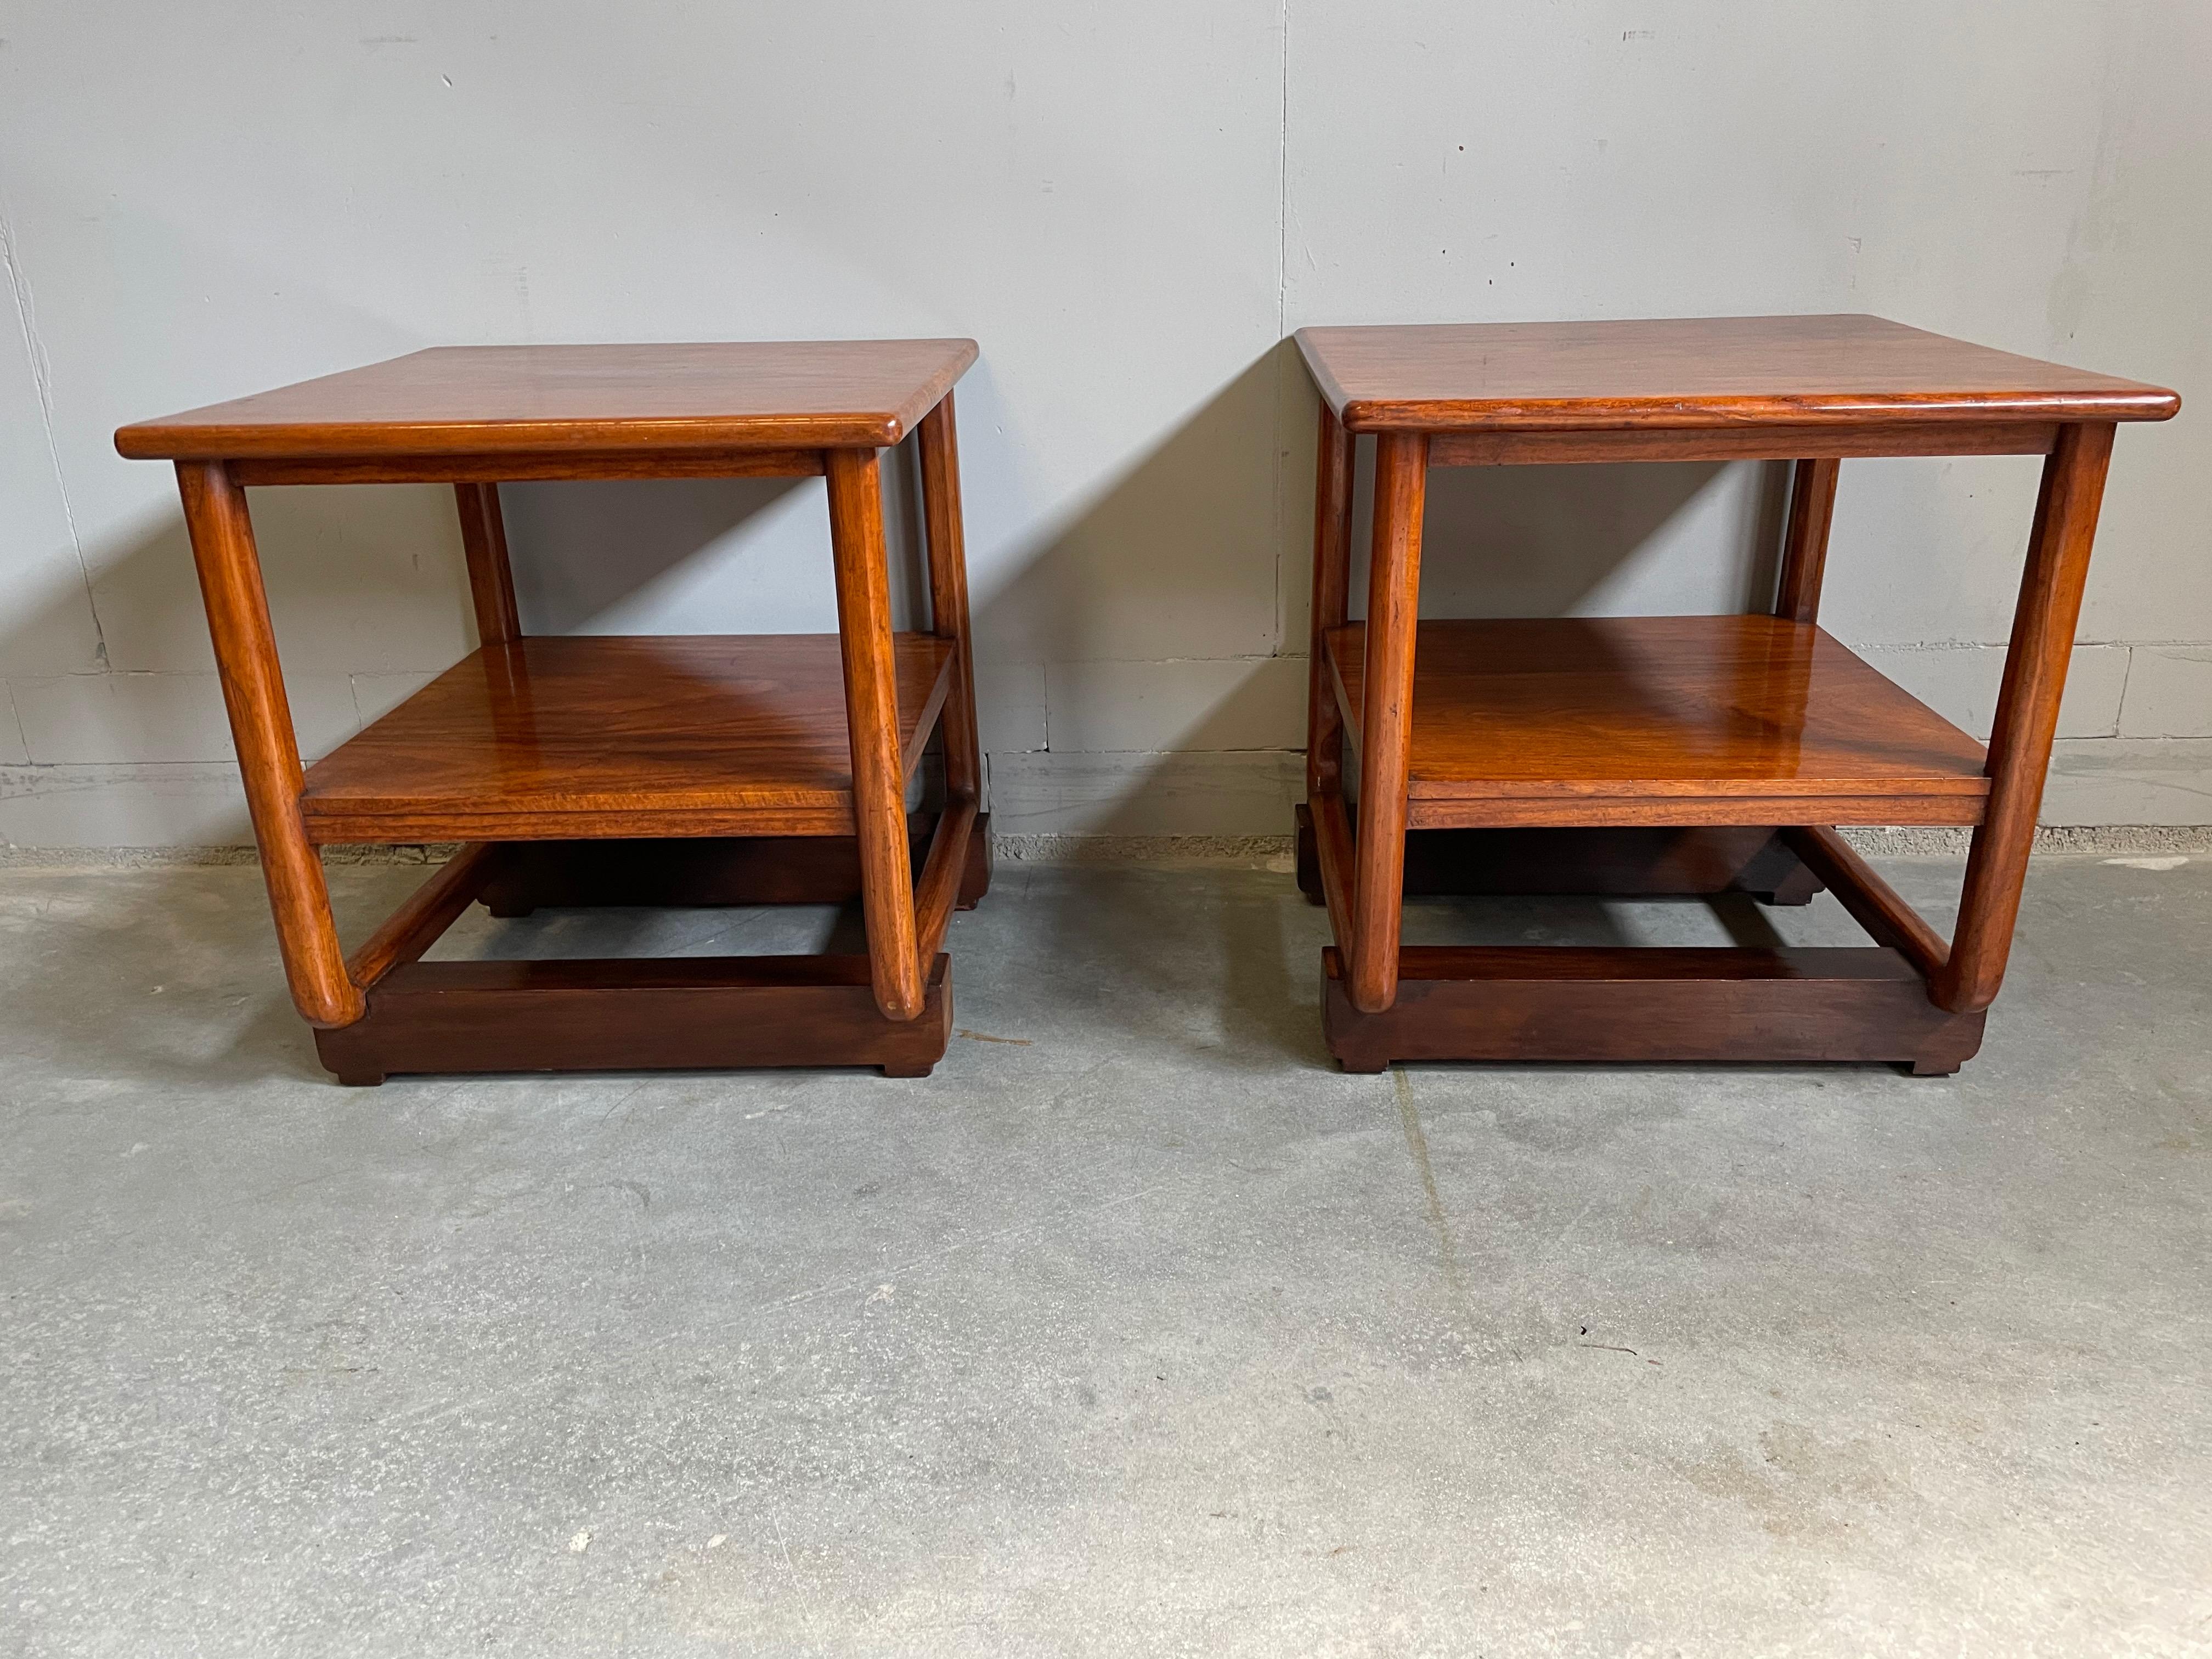 Stunning Handcrafted Pair of Dutch Colonial Art Deco End Tables of Java Teak For Sale 5